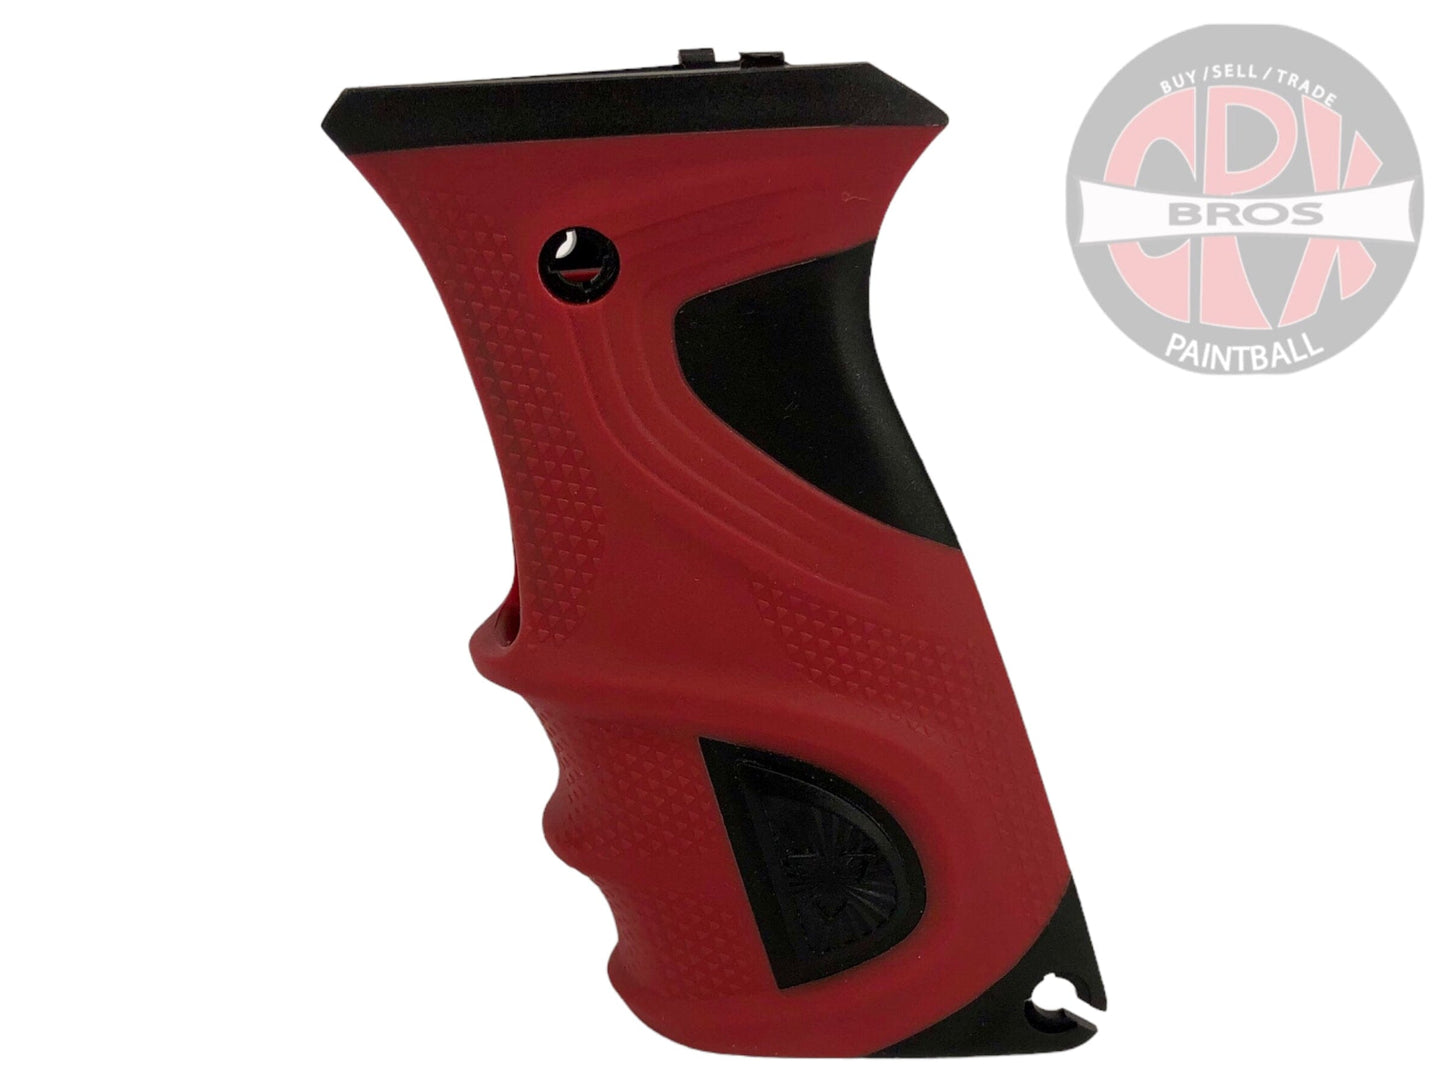 Used DLX Luxe TM40 Rubber Grips - Red Paintball Gun from CPXBrosPaintball Buy/Sell/Trade Paintball Markers, Paintball Hoppers, Paintball Masks, and Hormesis Headbands